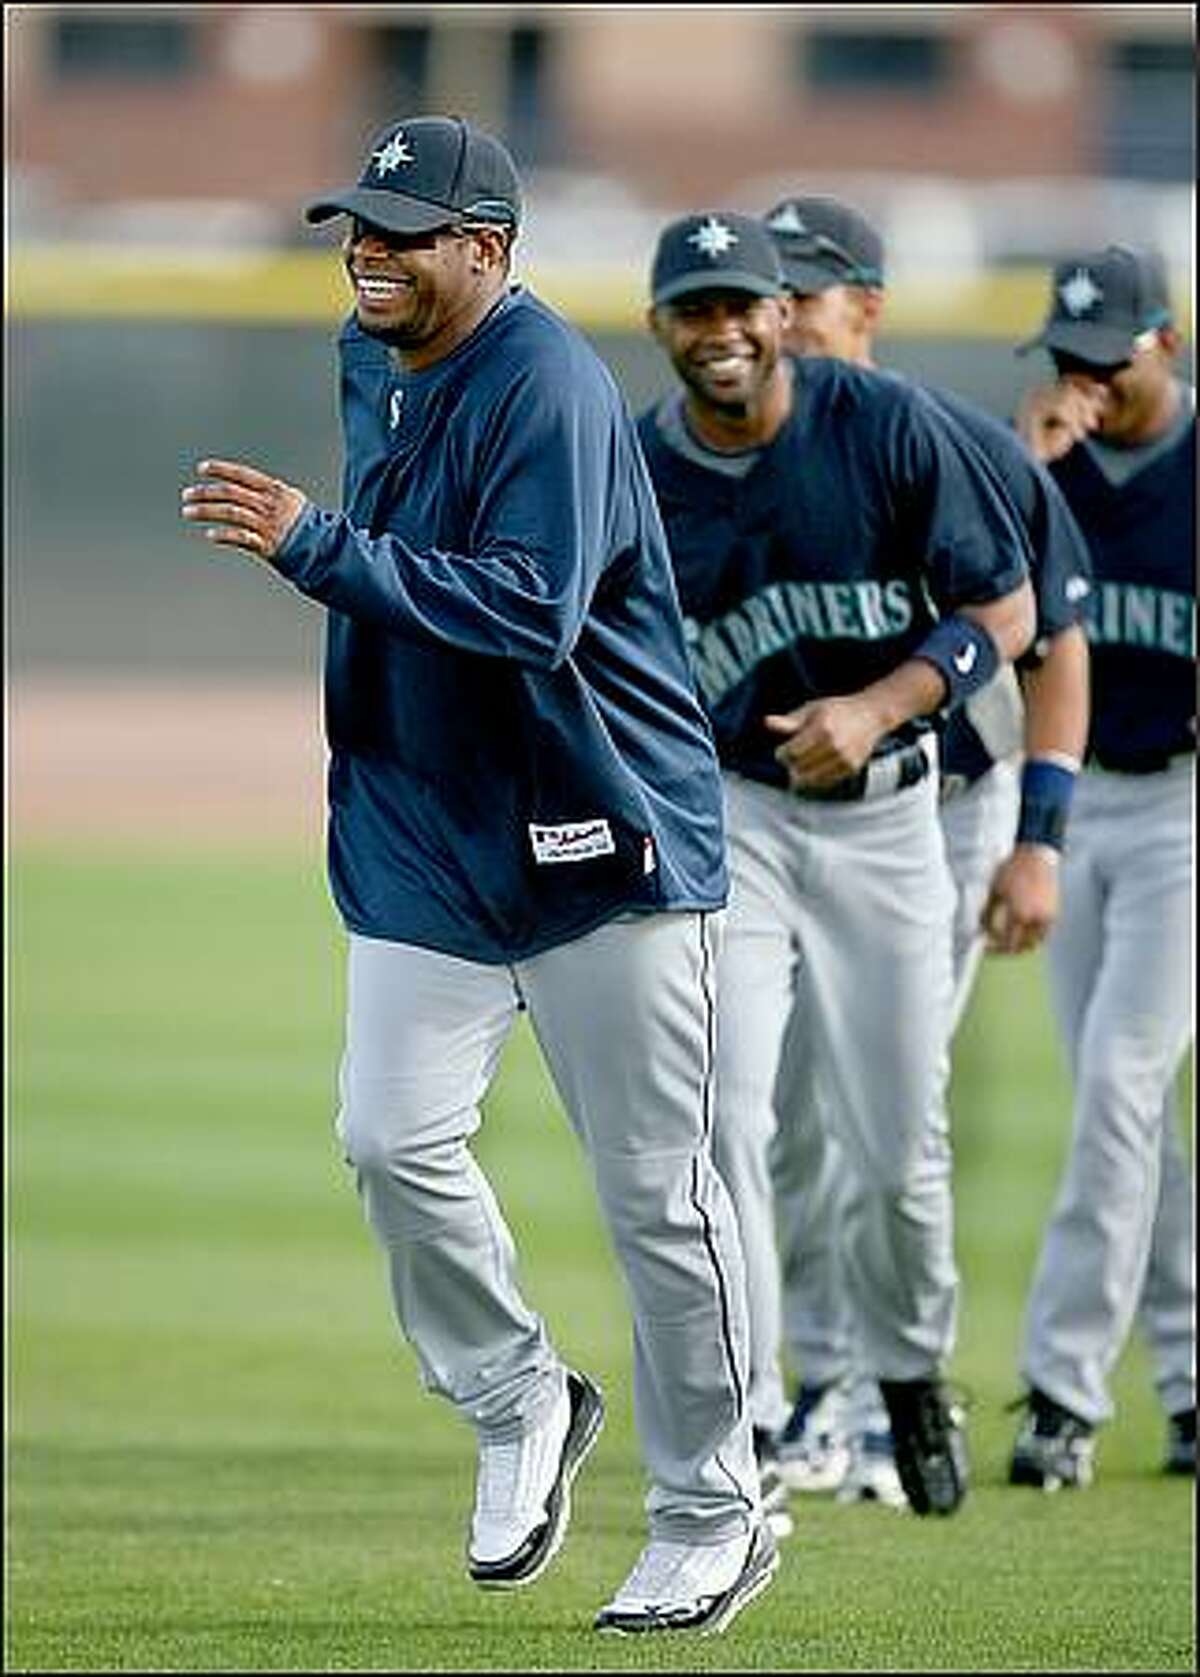 Ken Griffey Jr. warms up with a slow jog as he participates in his first team workout at the Seattle Mariners' spring training facility in Peoria, Ariz.